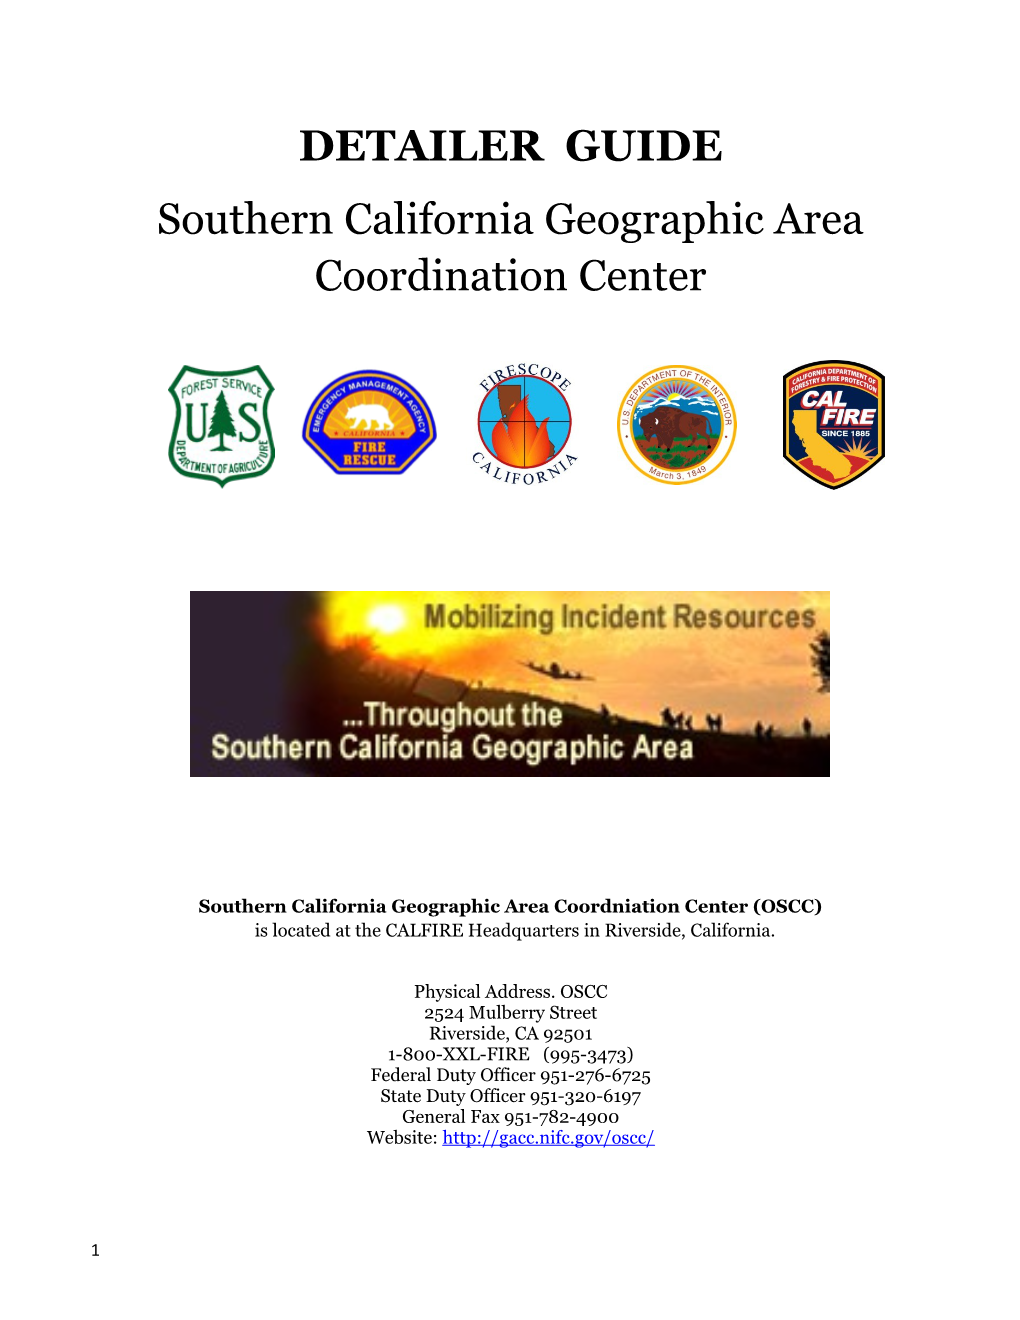 Southern California Geographic Area Coordination Center